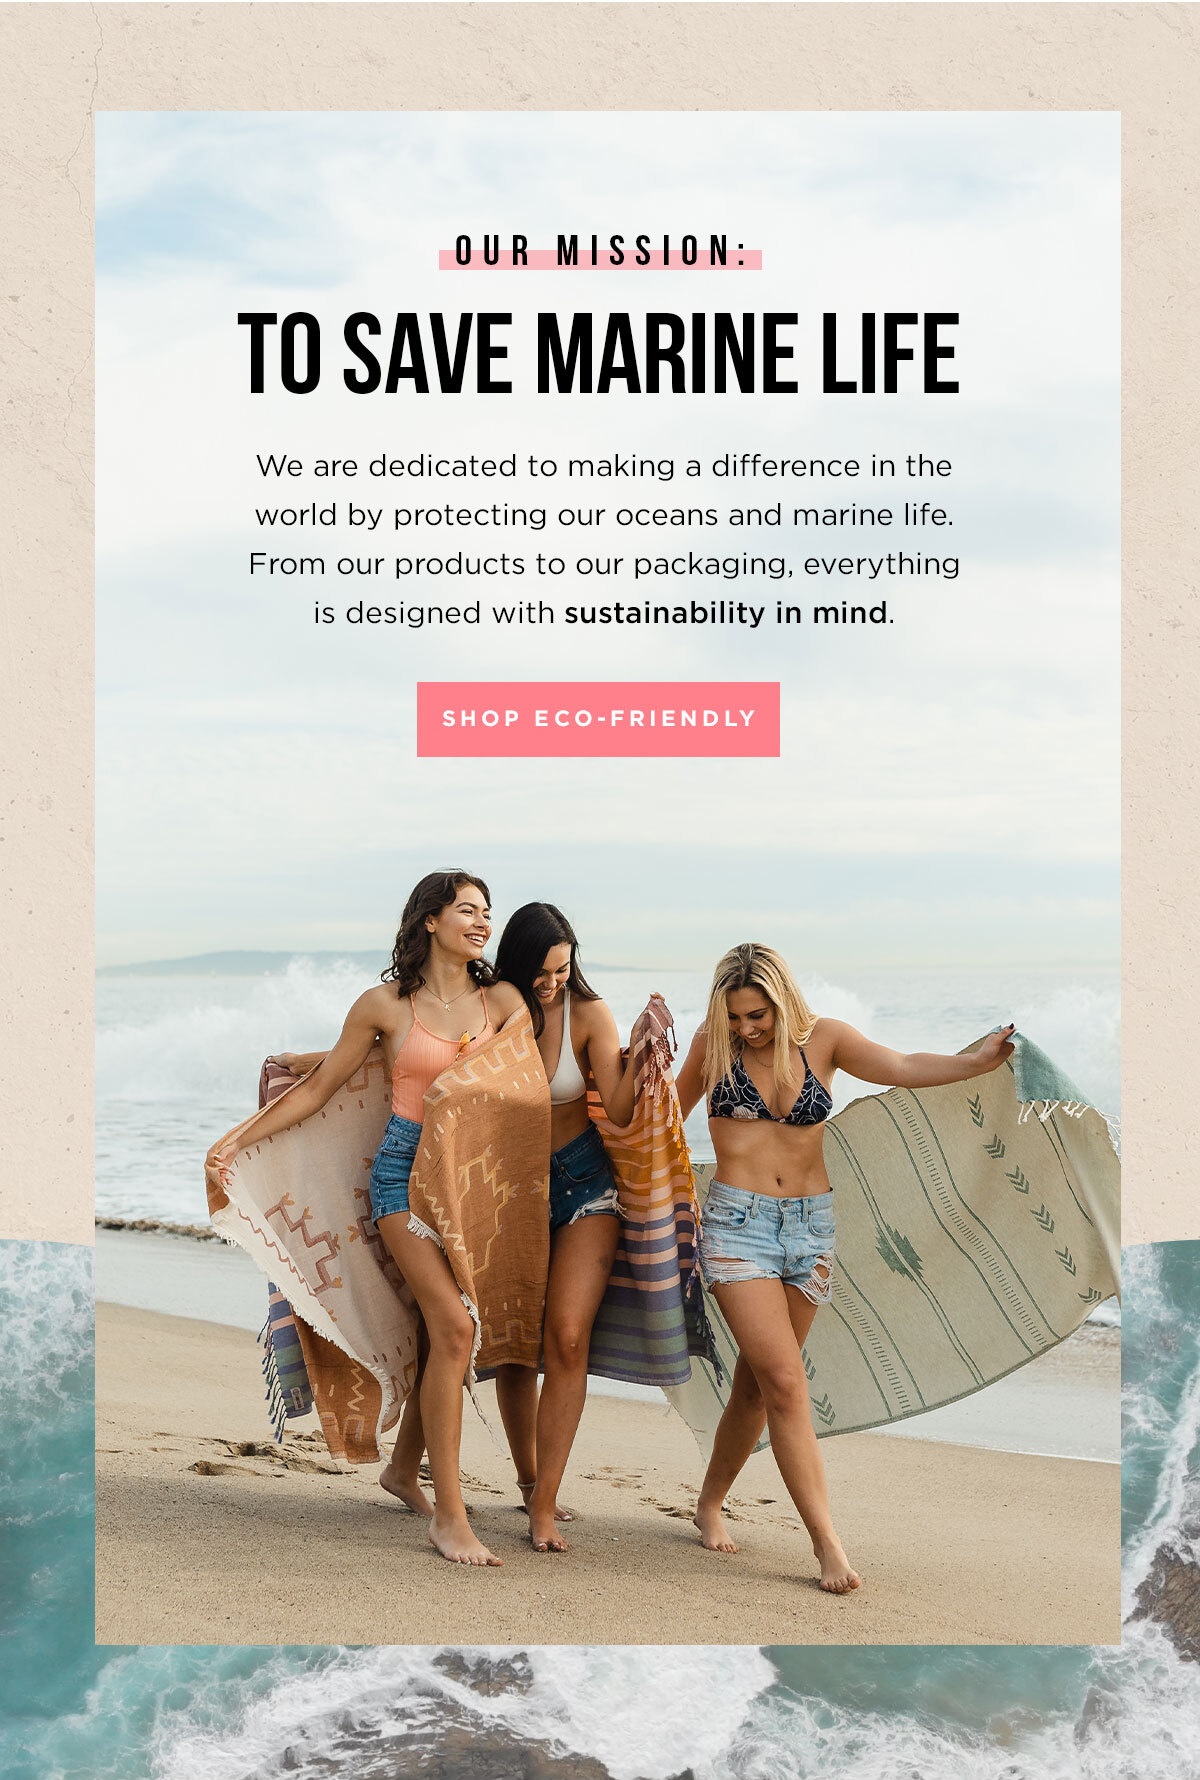 OUR MISSION: TO SAVE MARINE LIFE - SHOP ECO-FRIENDLY